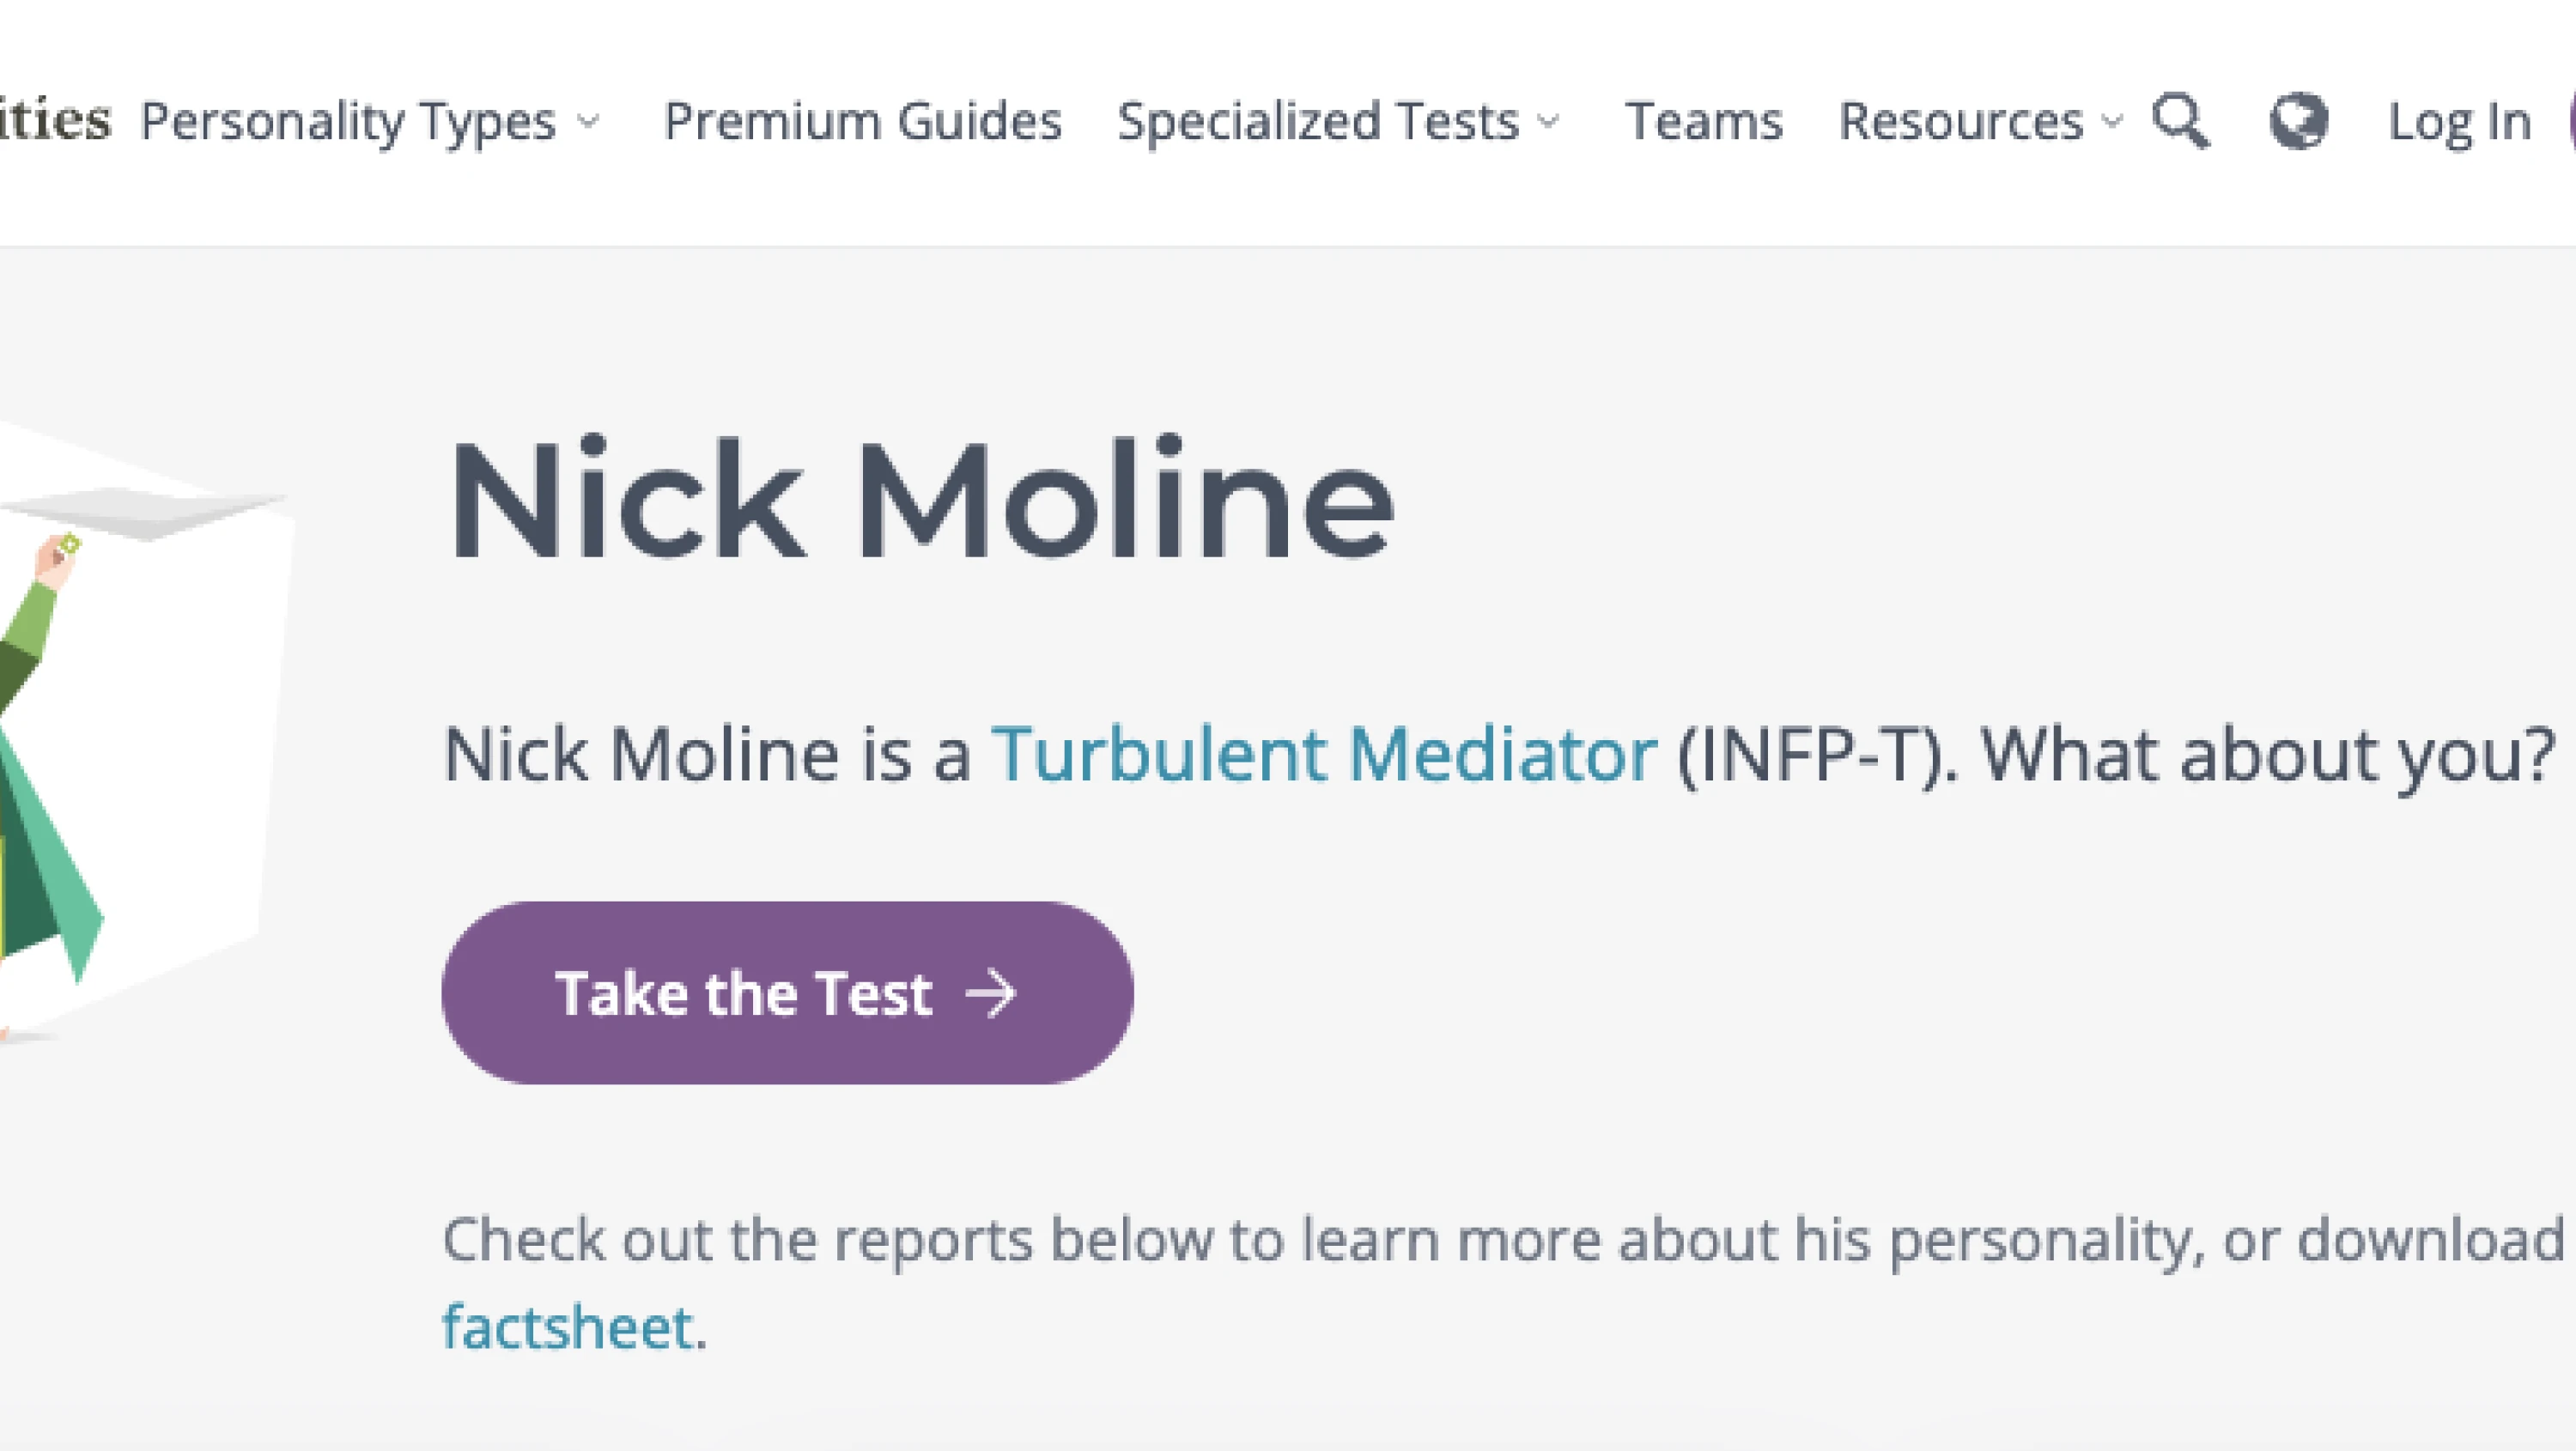 Nick Moline is a Turbulent Mediator (INFP-T)